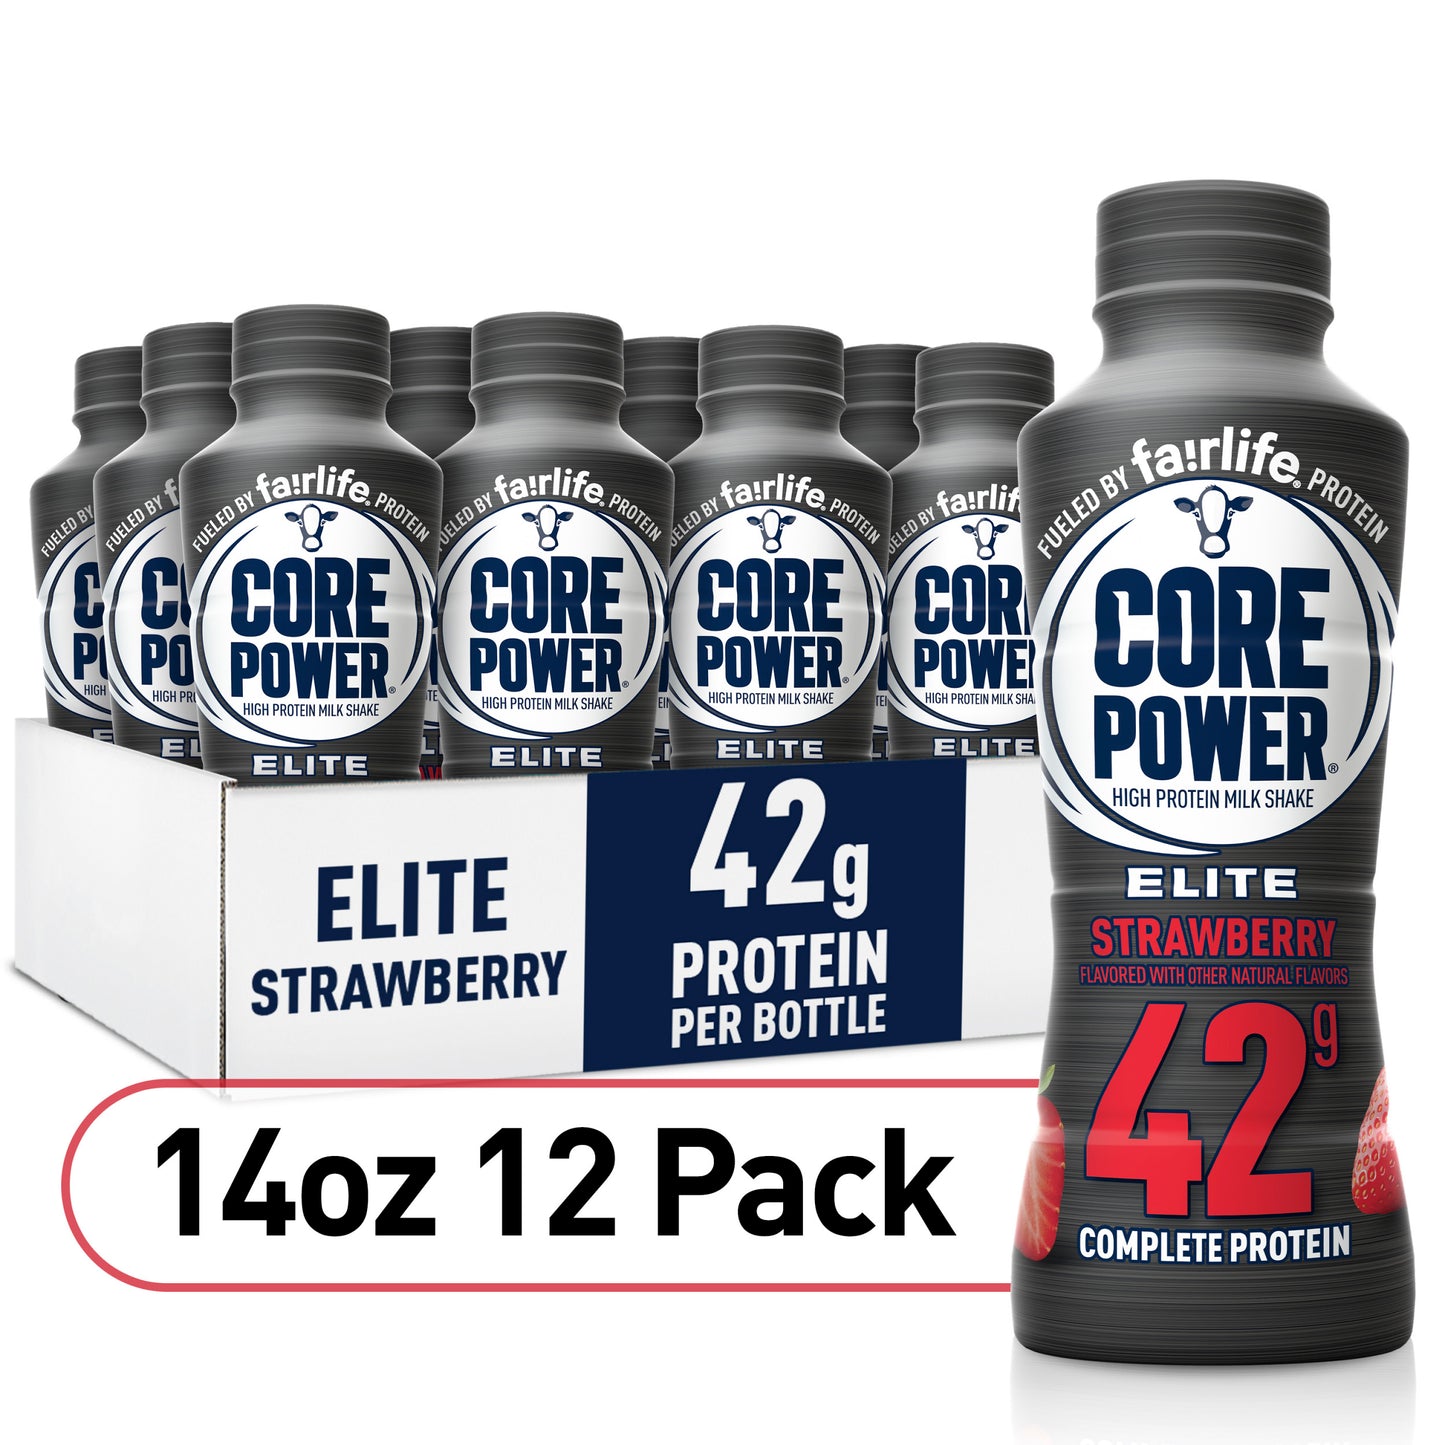 Core Power Elite High Protein Shake with 42g Protein by fairlife Milk, Strawberry, 14 fl oz, 12 Count